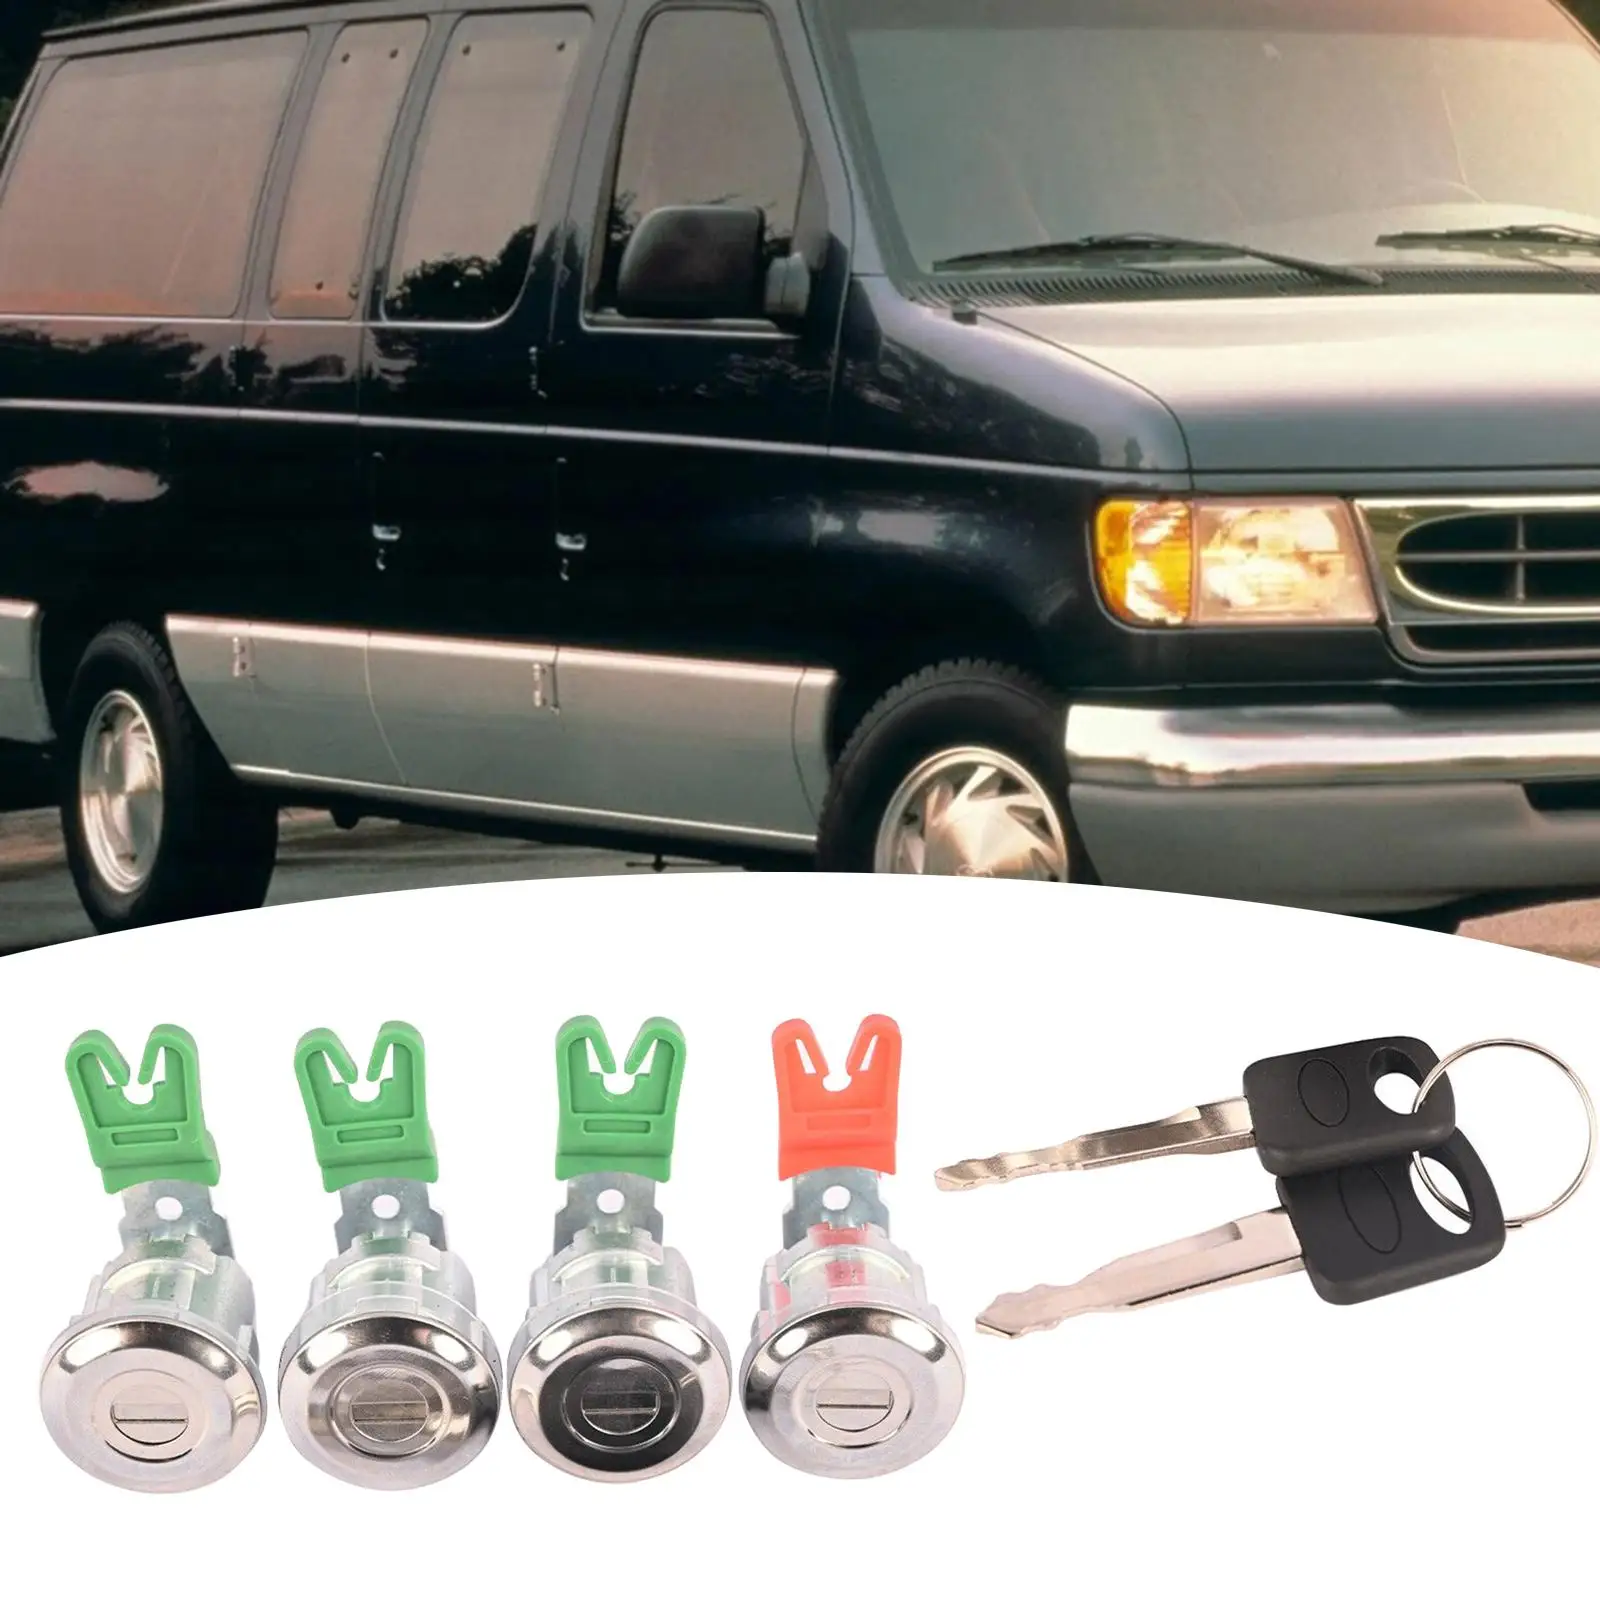 Door Locks Cylinder Lock Set Rear Door Assembly Easy to Install Replaces Accessories 597638 for Ford E Series Van 1997-2020